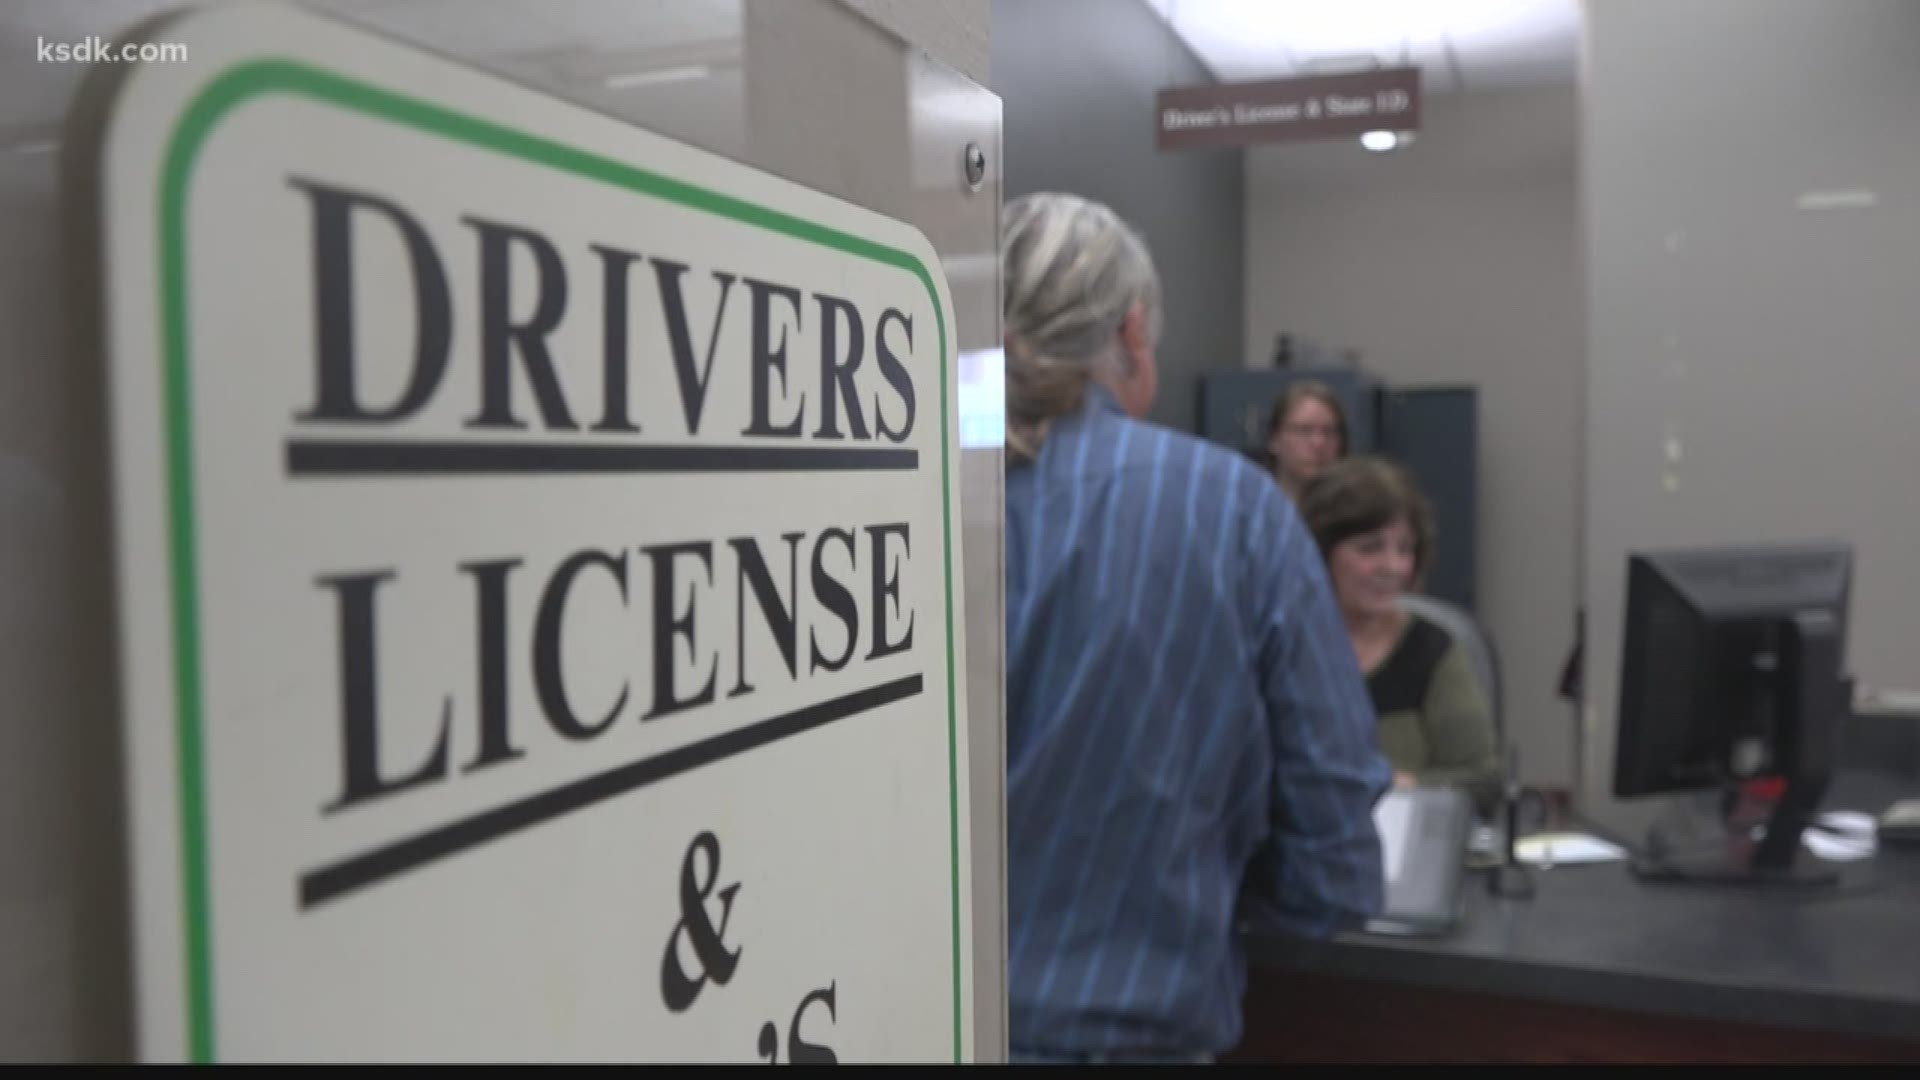 If you need a new driver's license, expect a wait. That's the message today from the state, as Missouri rolls out Real ID compliant licenses.